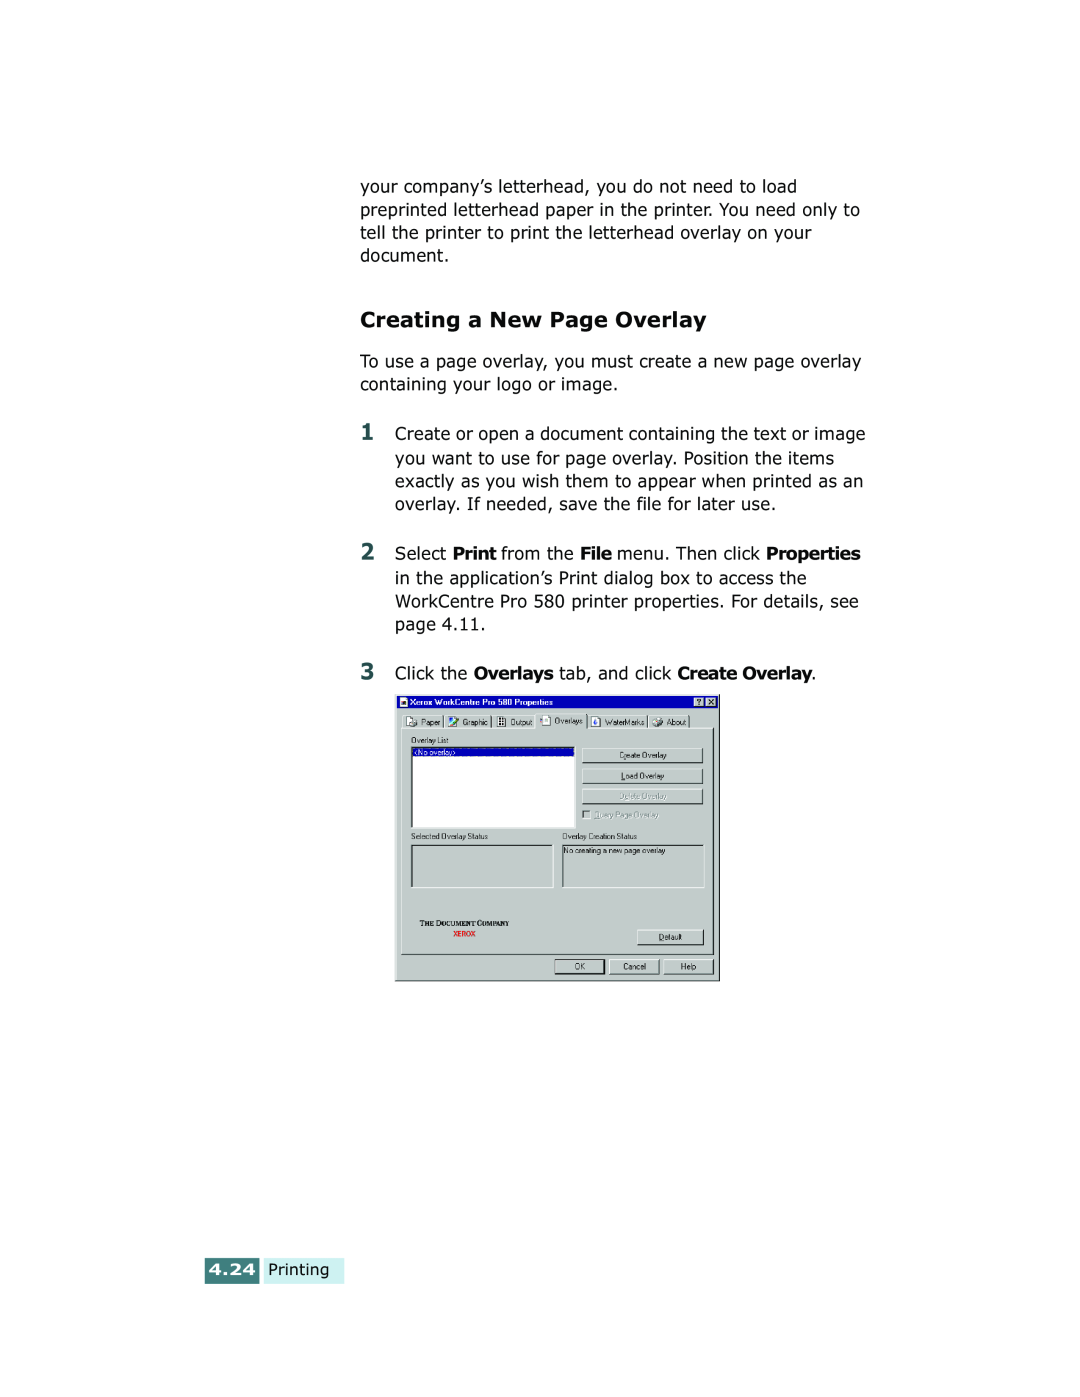 Xerox Pro 580 manual Creating a New Page Overlay 